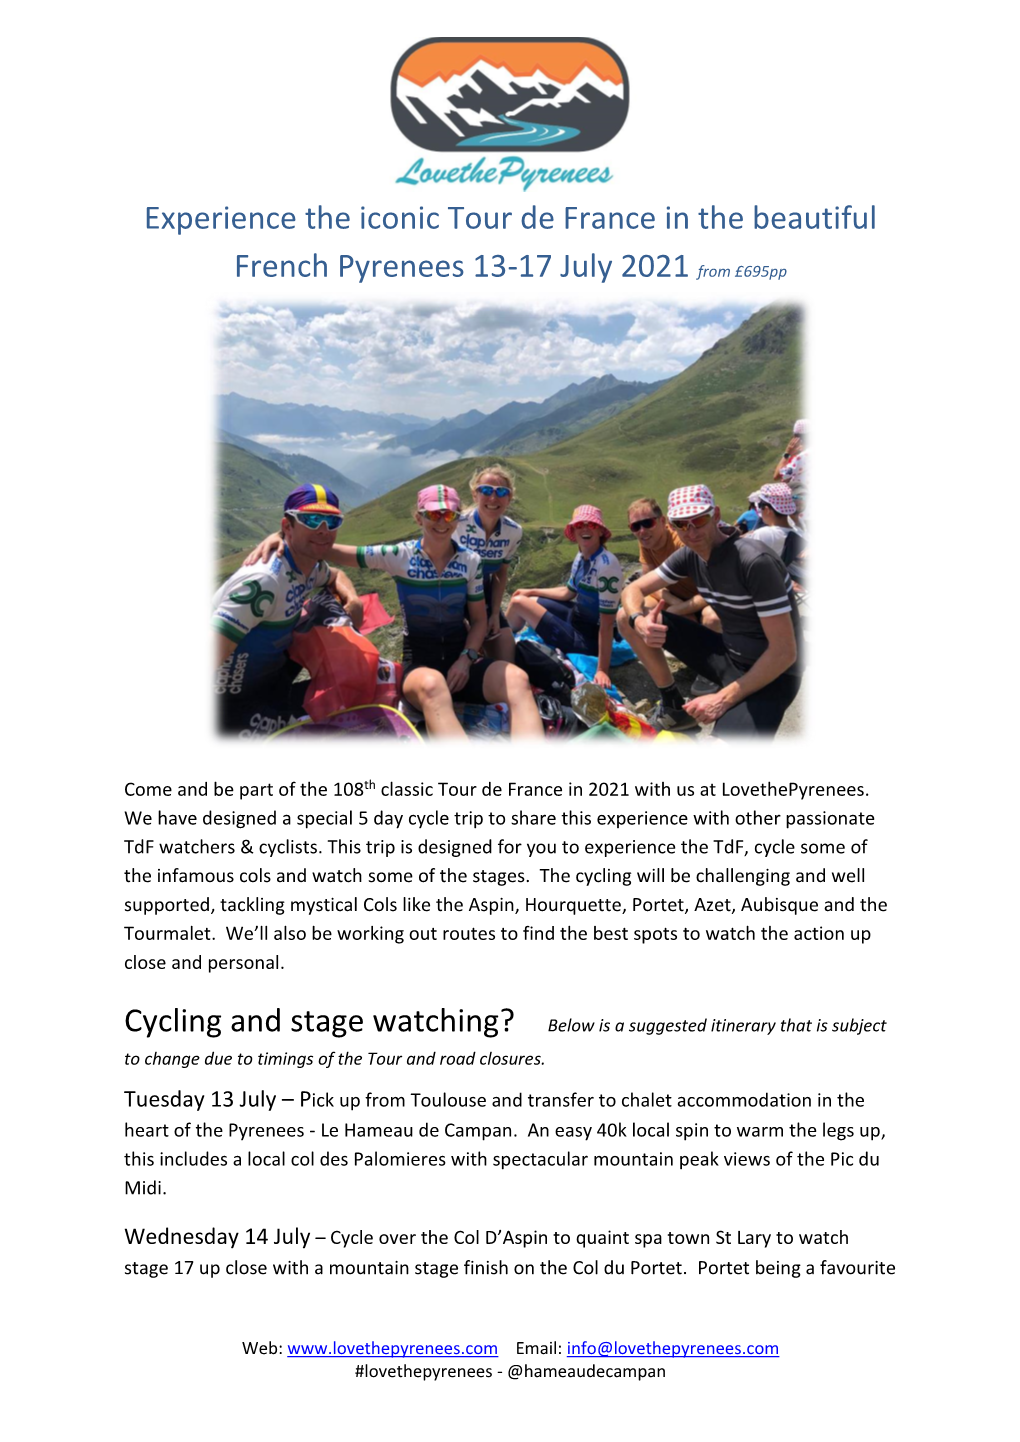 Experience the Iconic Tour De France in the Beautiful French Pyrenees 13